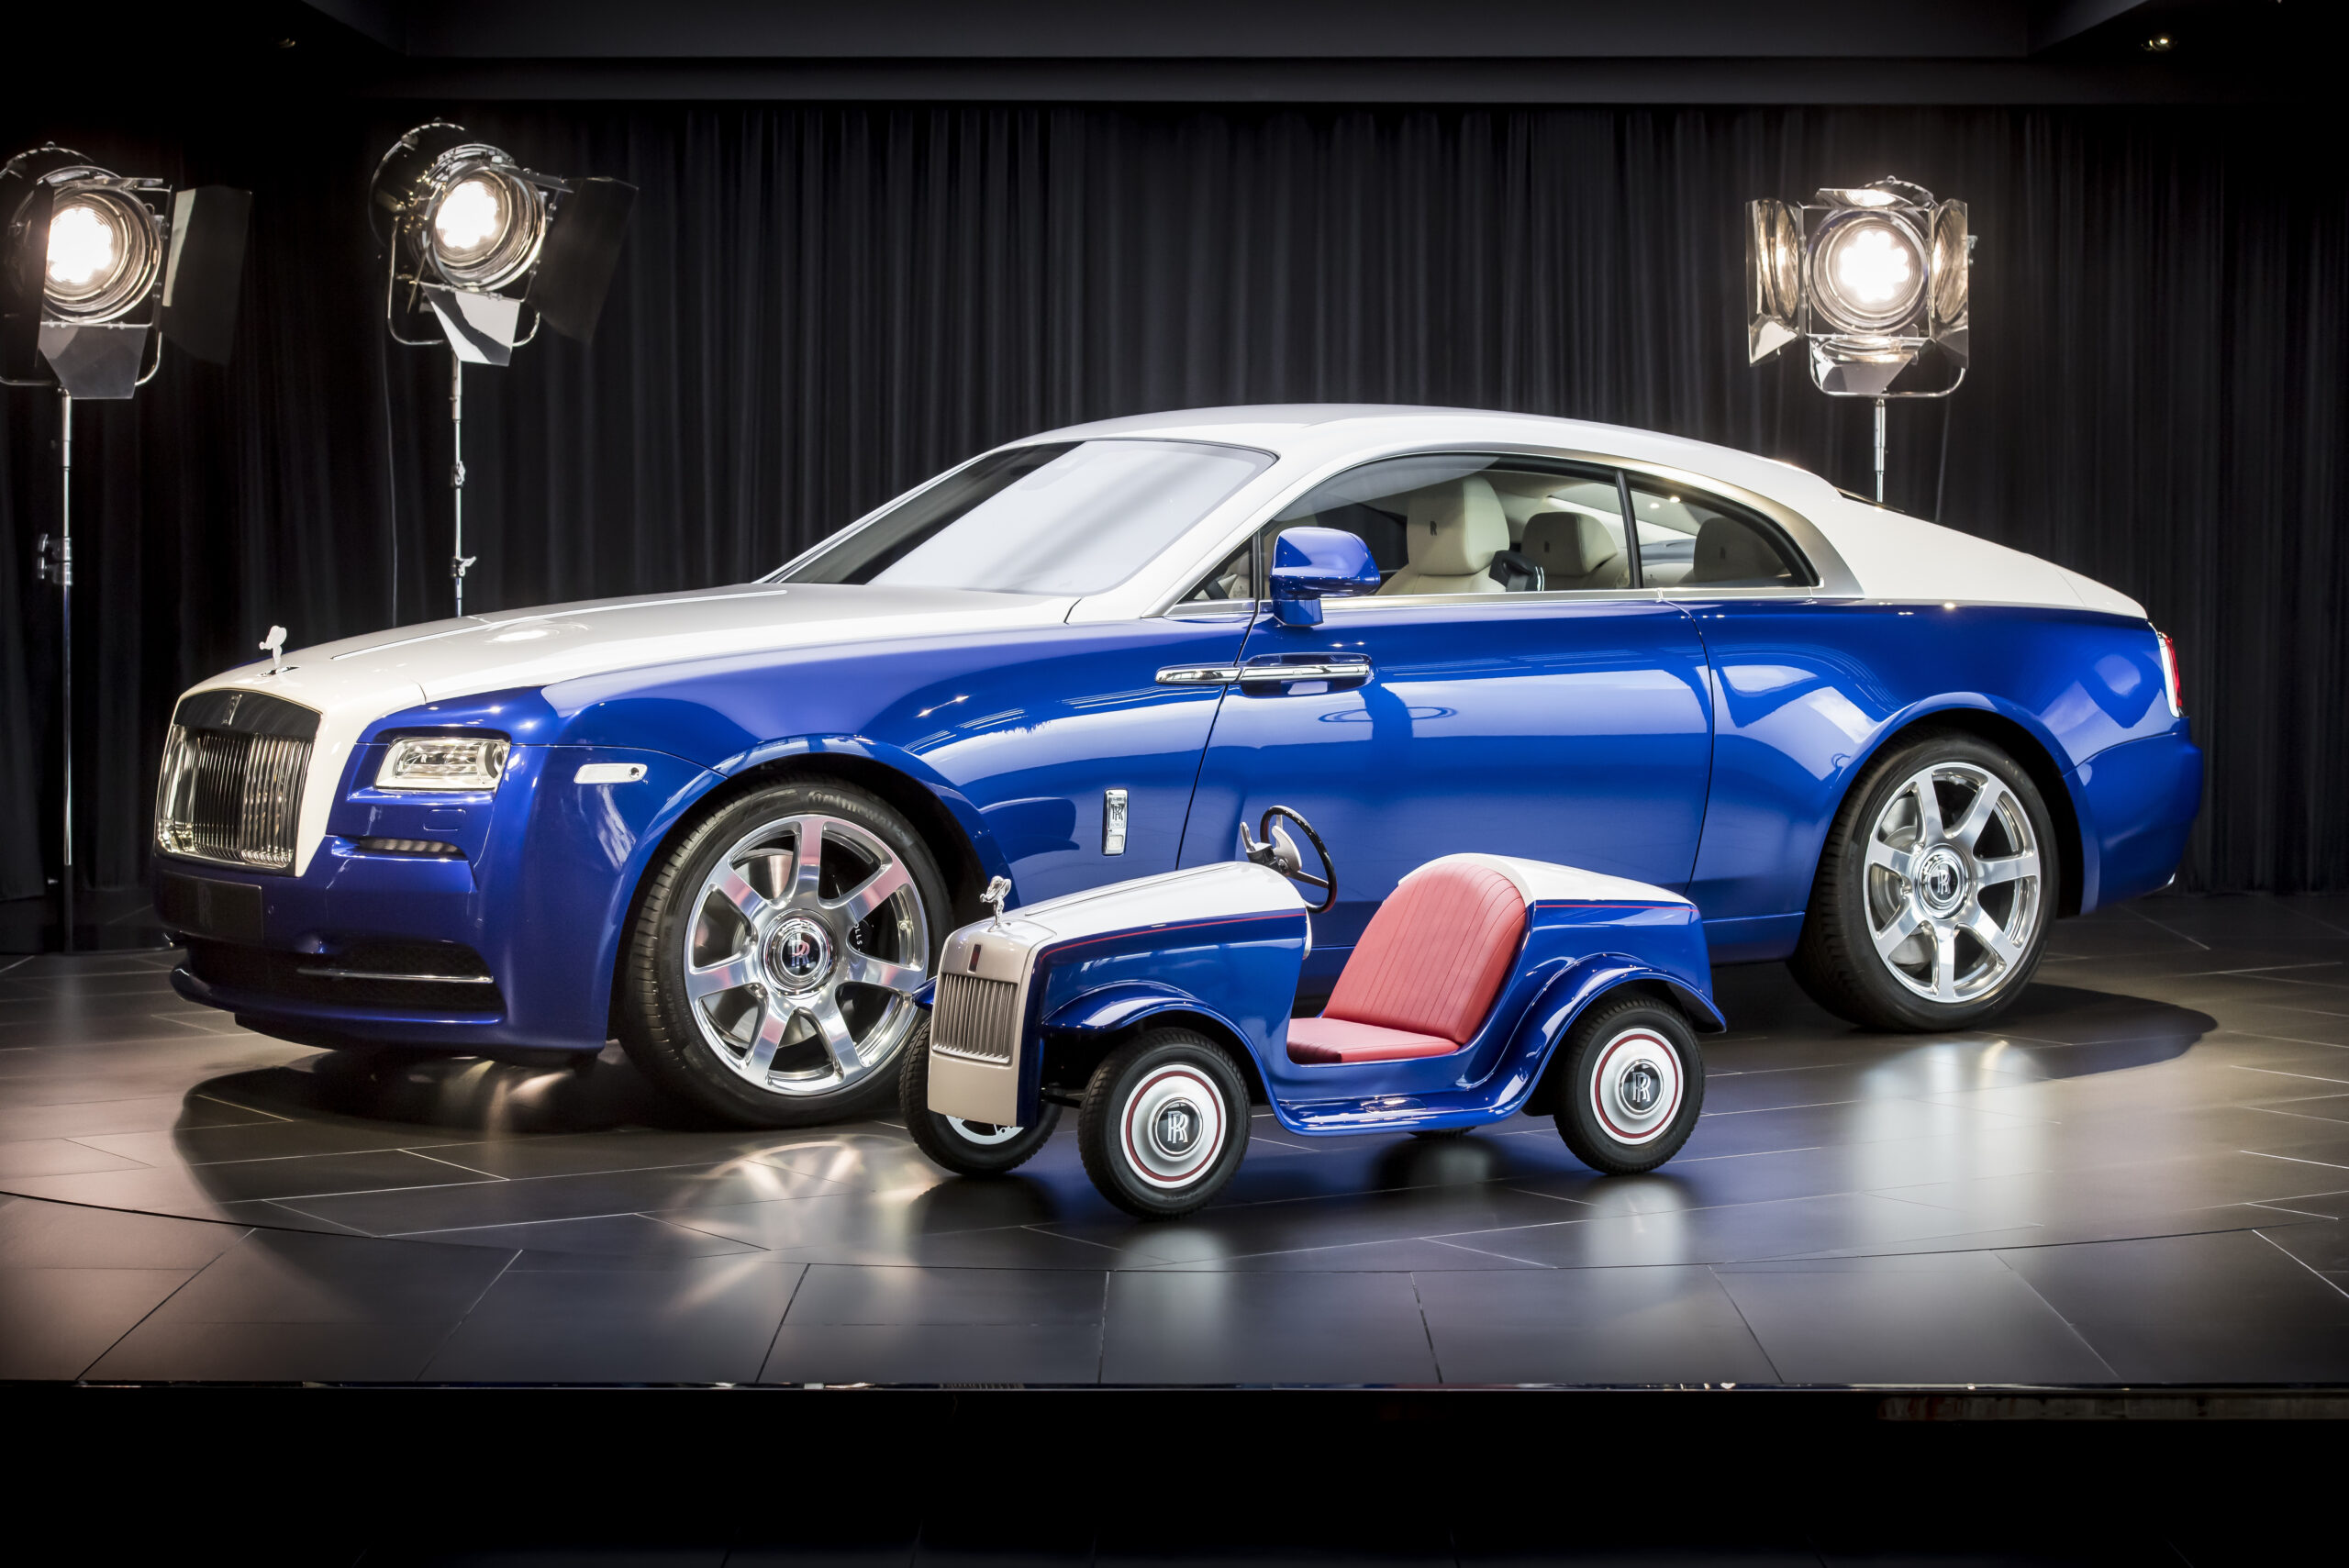 Rolling Into Surgery In Style: Rolls-Royce Donates Bespoke Mini Car to Help Children